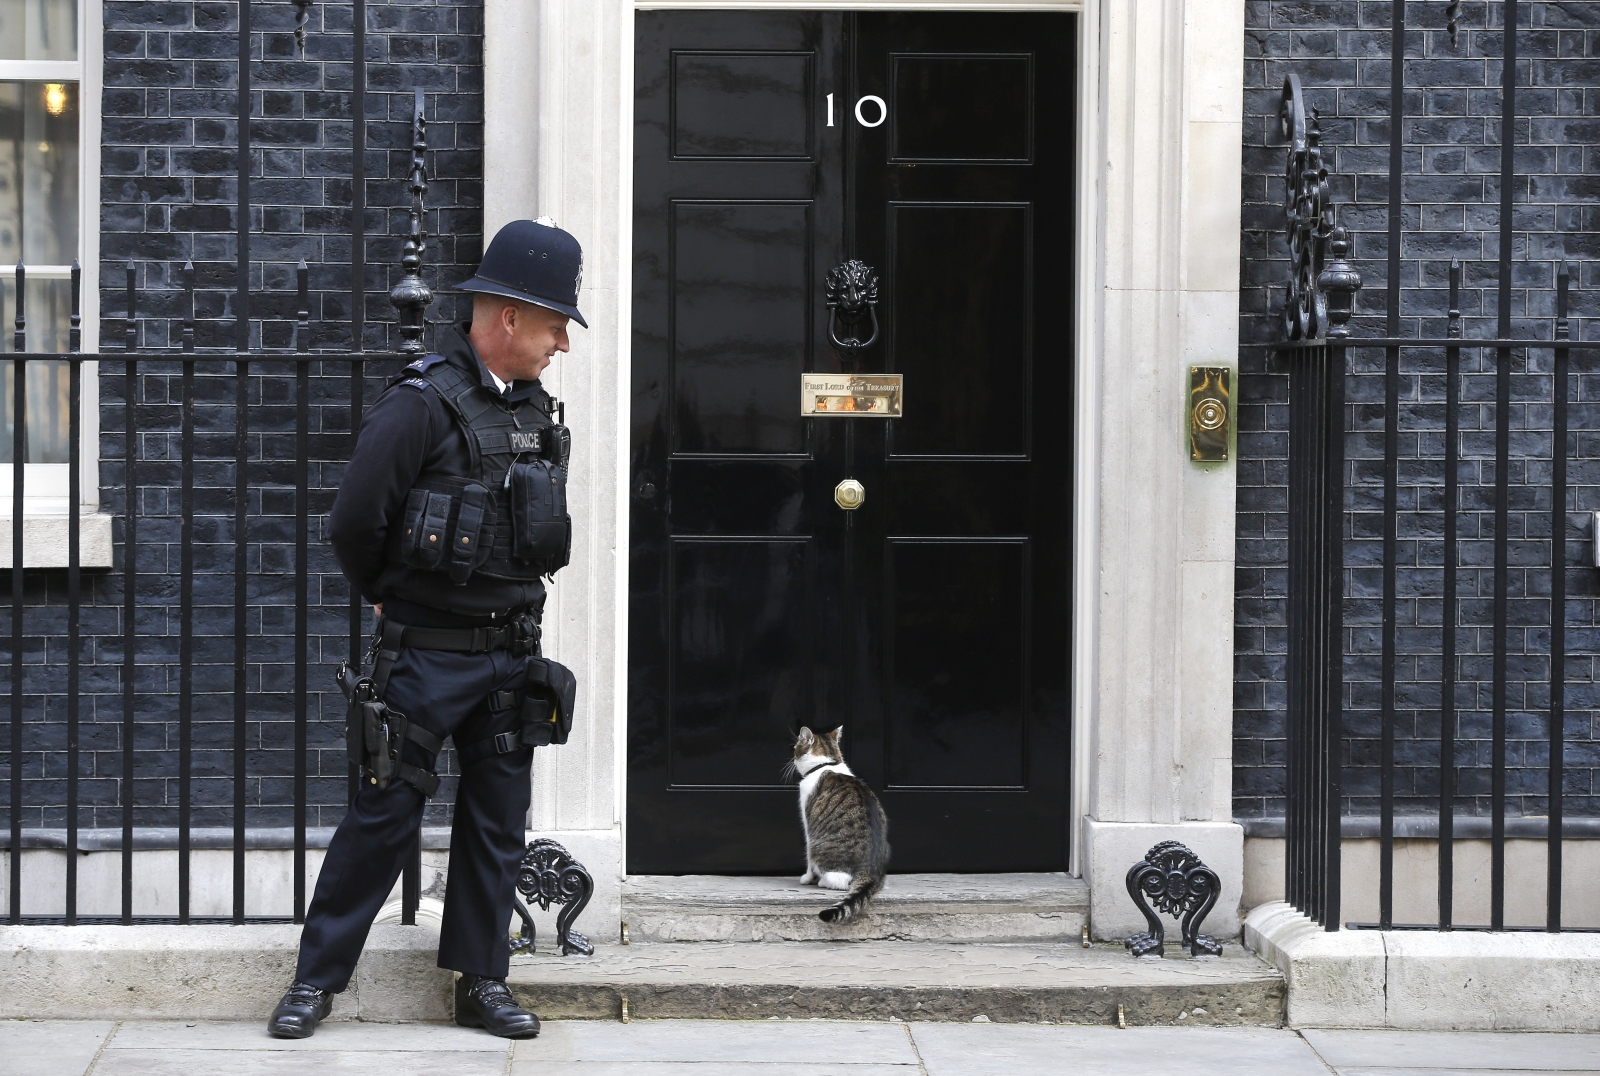 Can You Pass the British Citizenship Test? Number 10 Downing Street